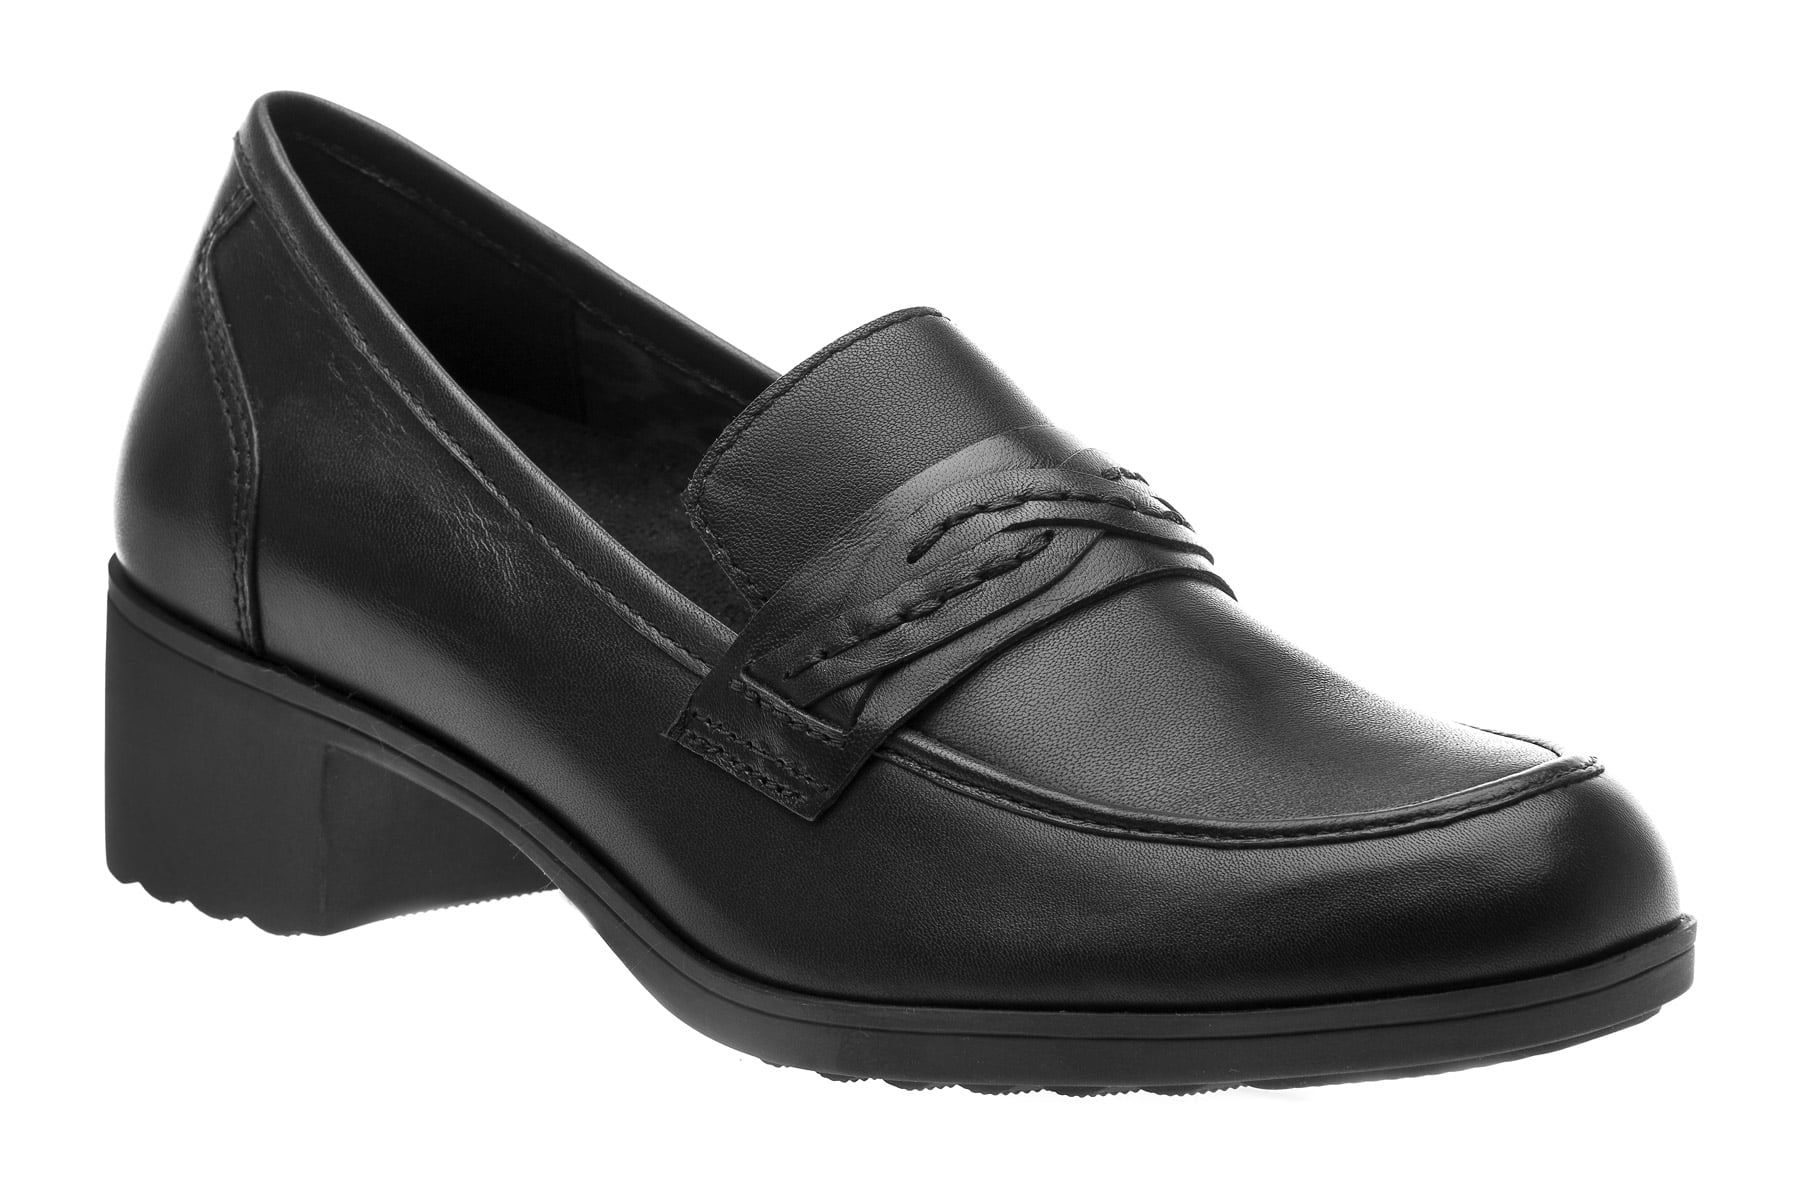 dress shoes for women at walmart